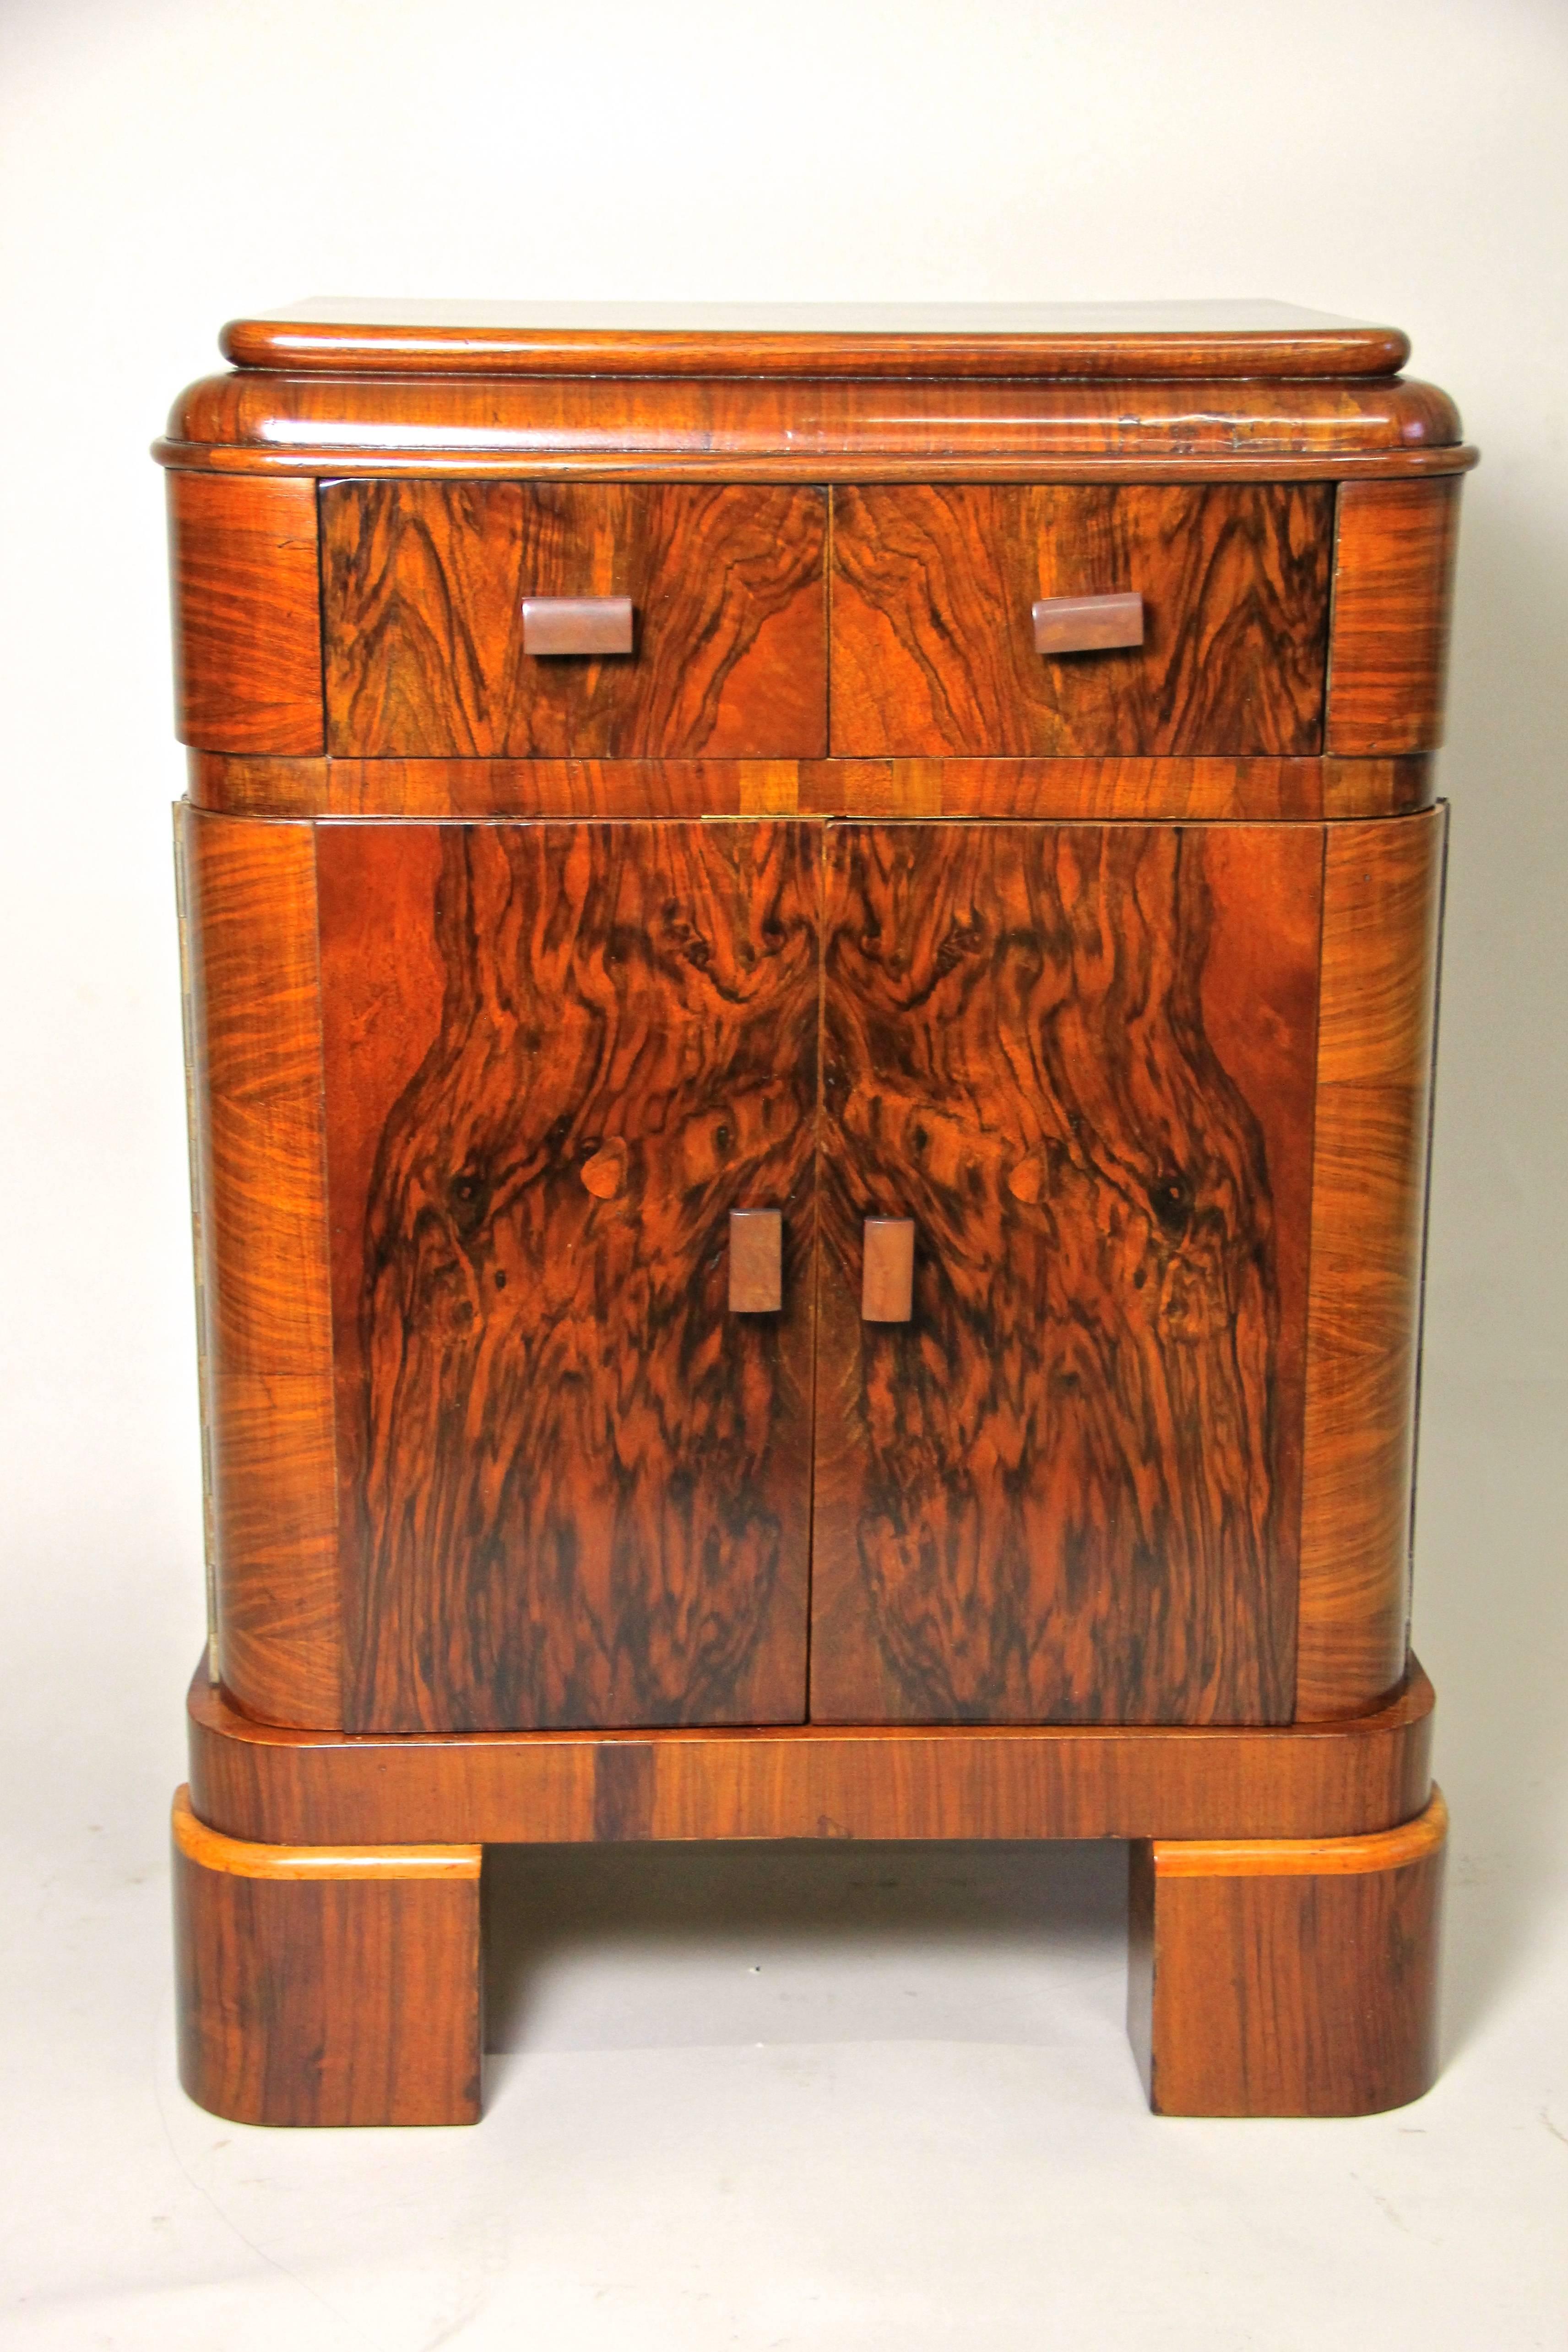 From the Art Deco era in Austria, circa 1925 comes this beautiful small Art Deco chest or side cabinet.
It shows a wonderful veneer picture made of fine burl nut. This fine chest has two small drawers and a double door, all veneered with mahogany